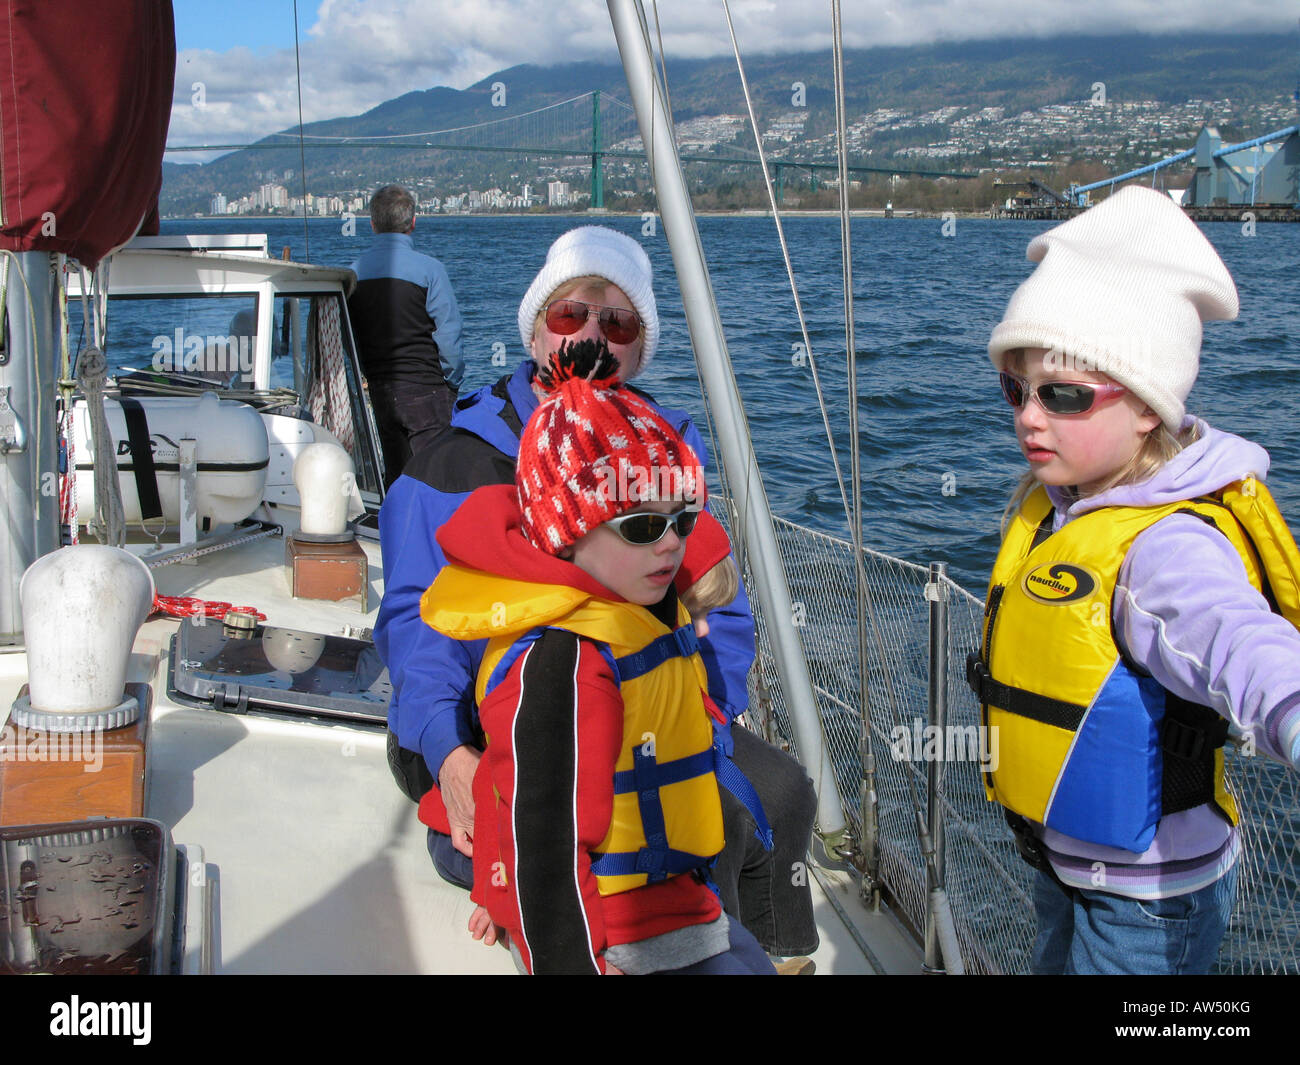 Family out on a sailboat ride West Vancouver, BC, Canada Stock Photo